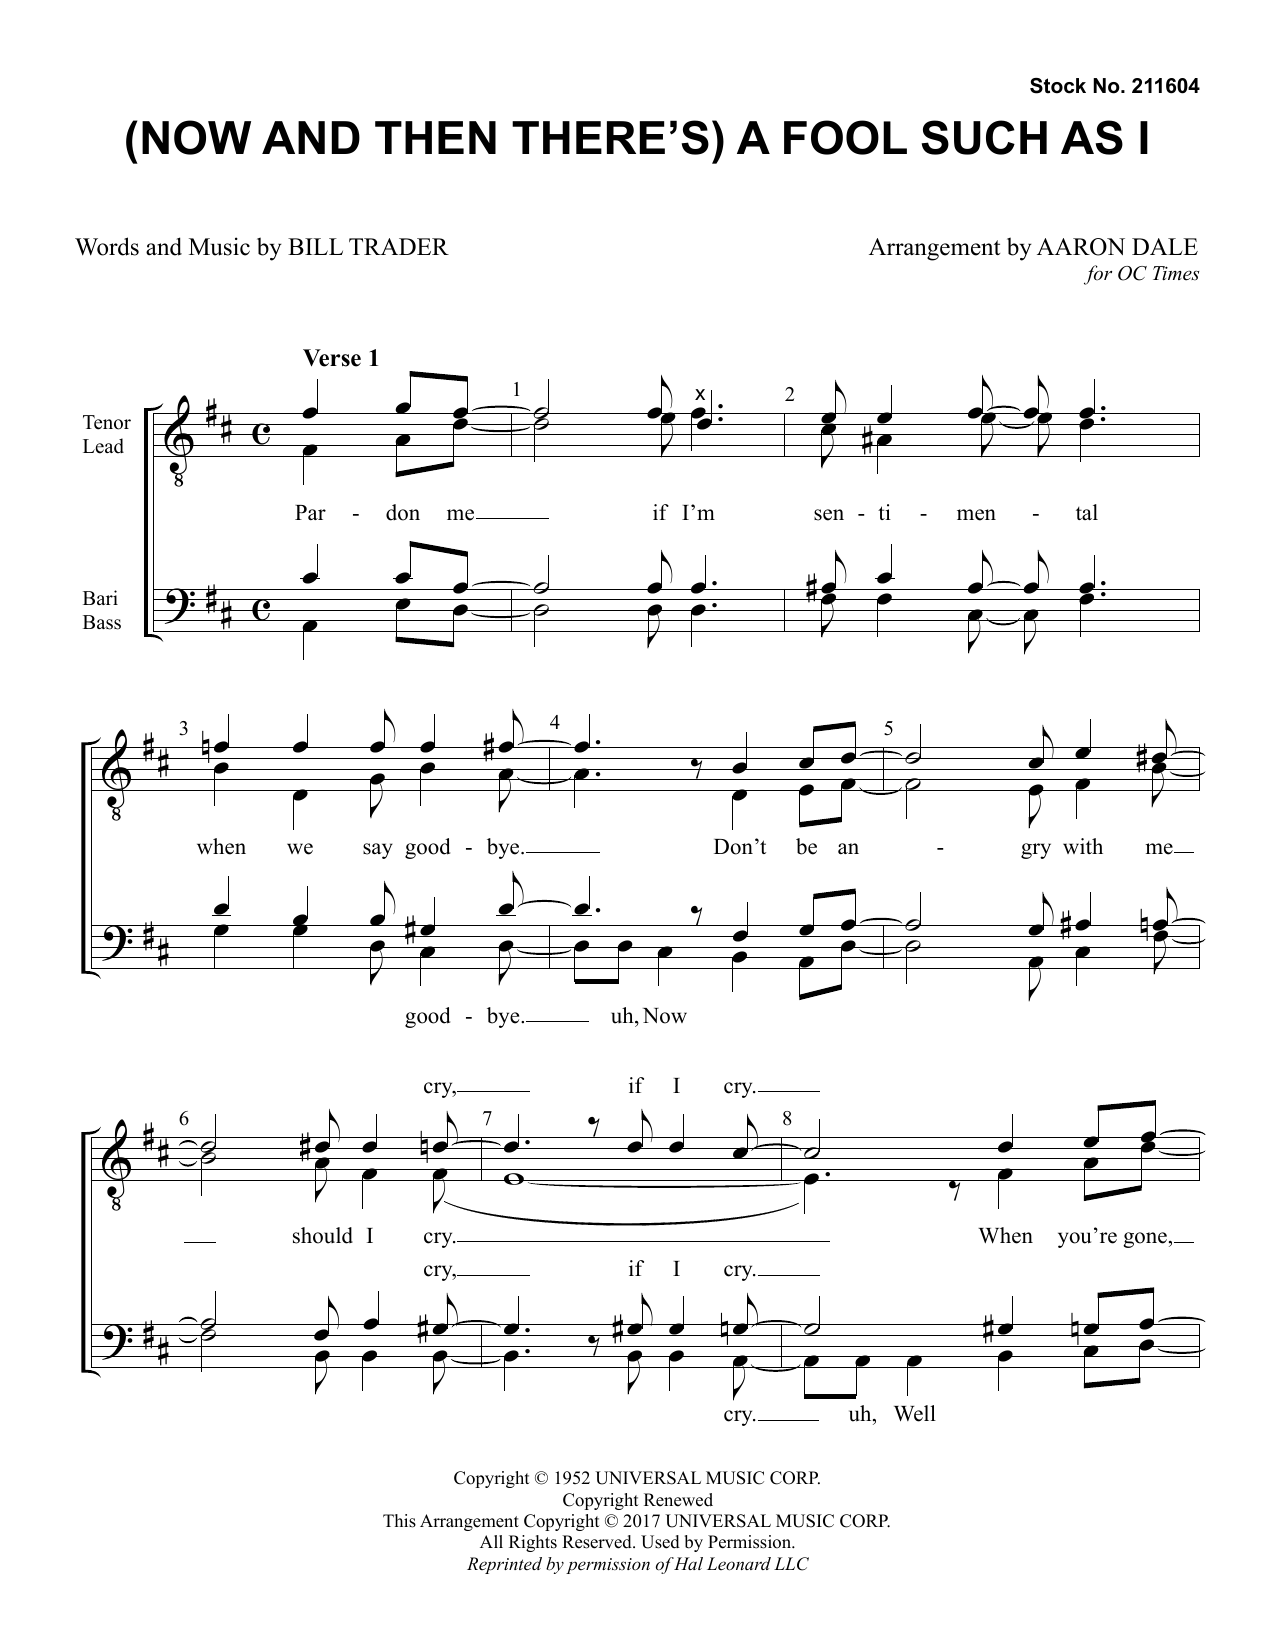 Download Bill Trader (Now And Then There's) A Fool Such As I Sheet Music